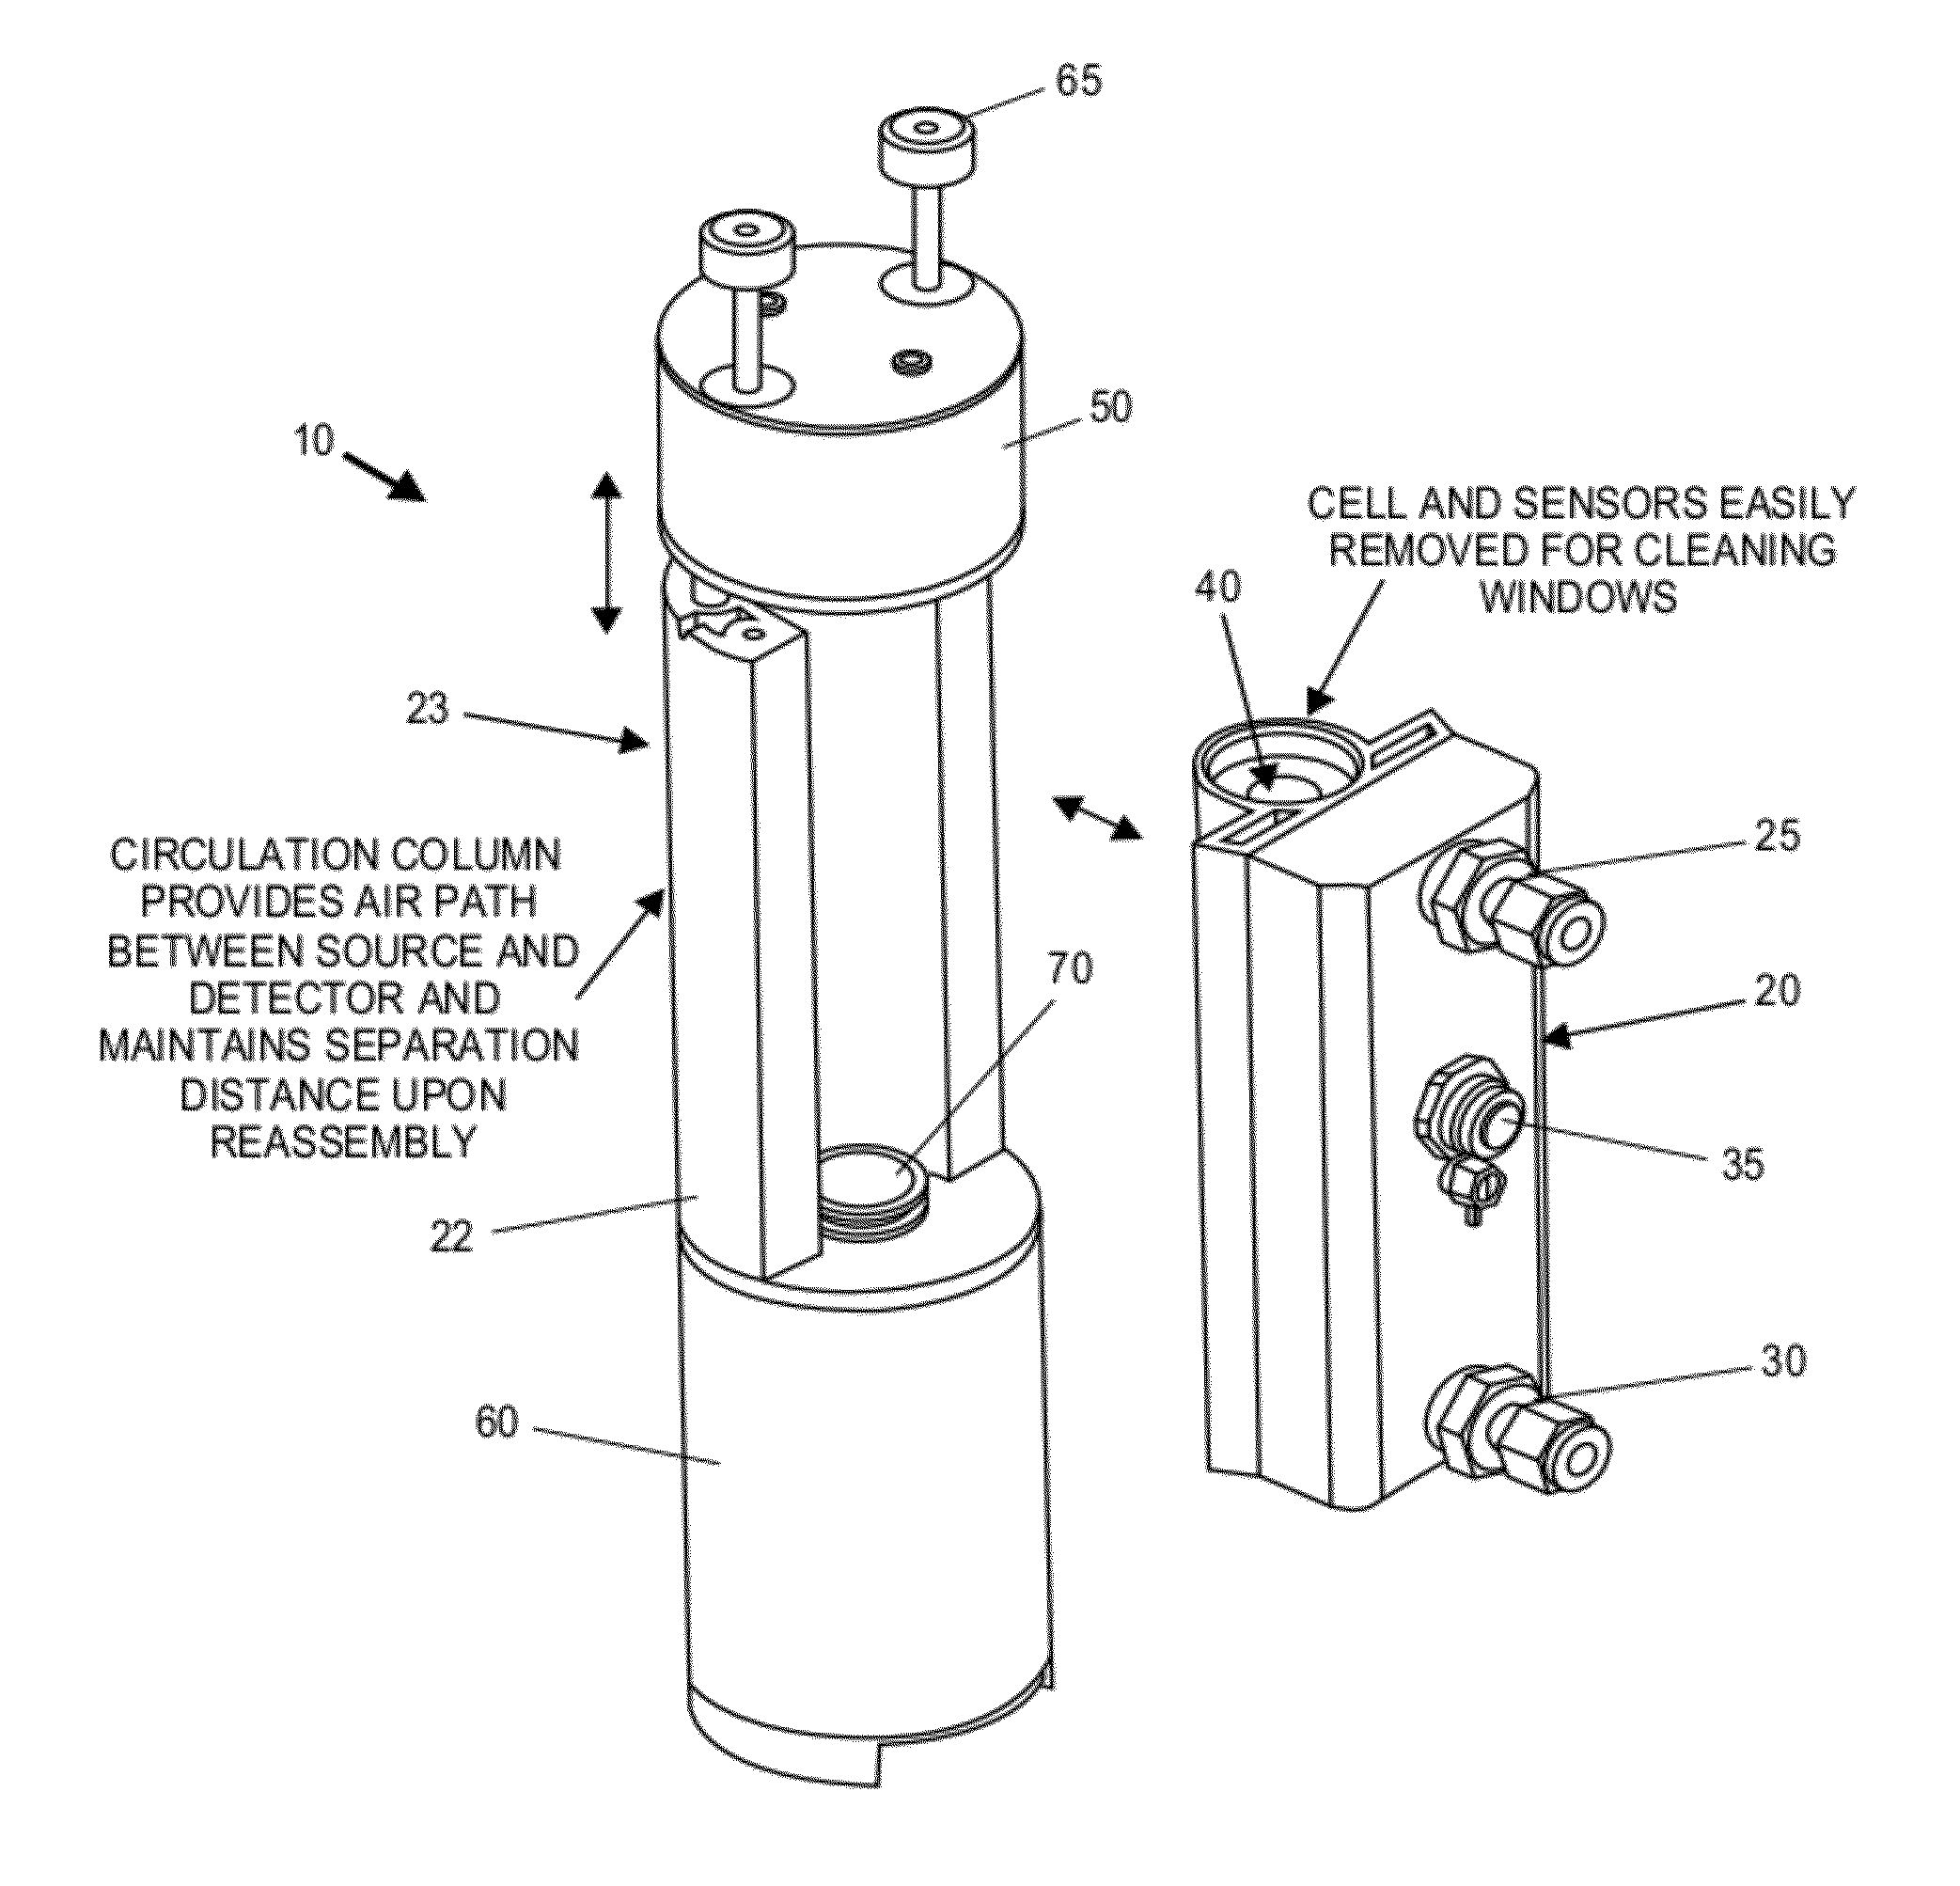 Hybrid gas analyzer with thermally insulated flow cell